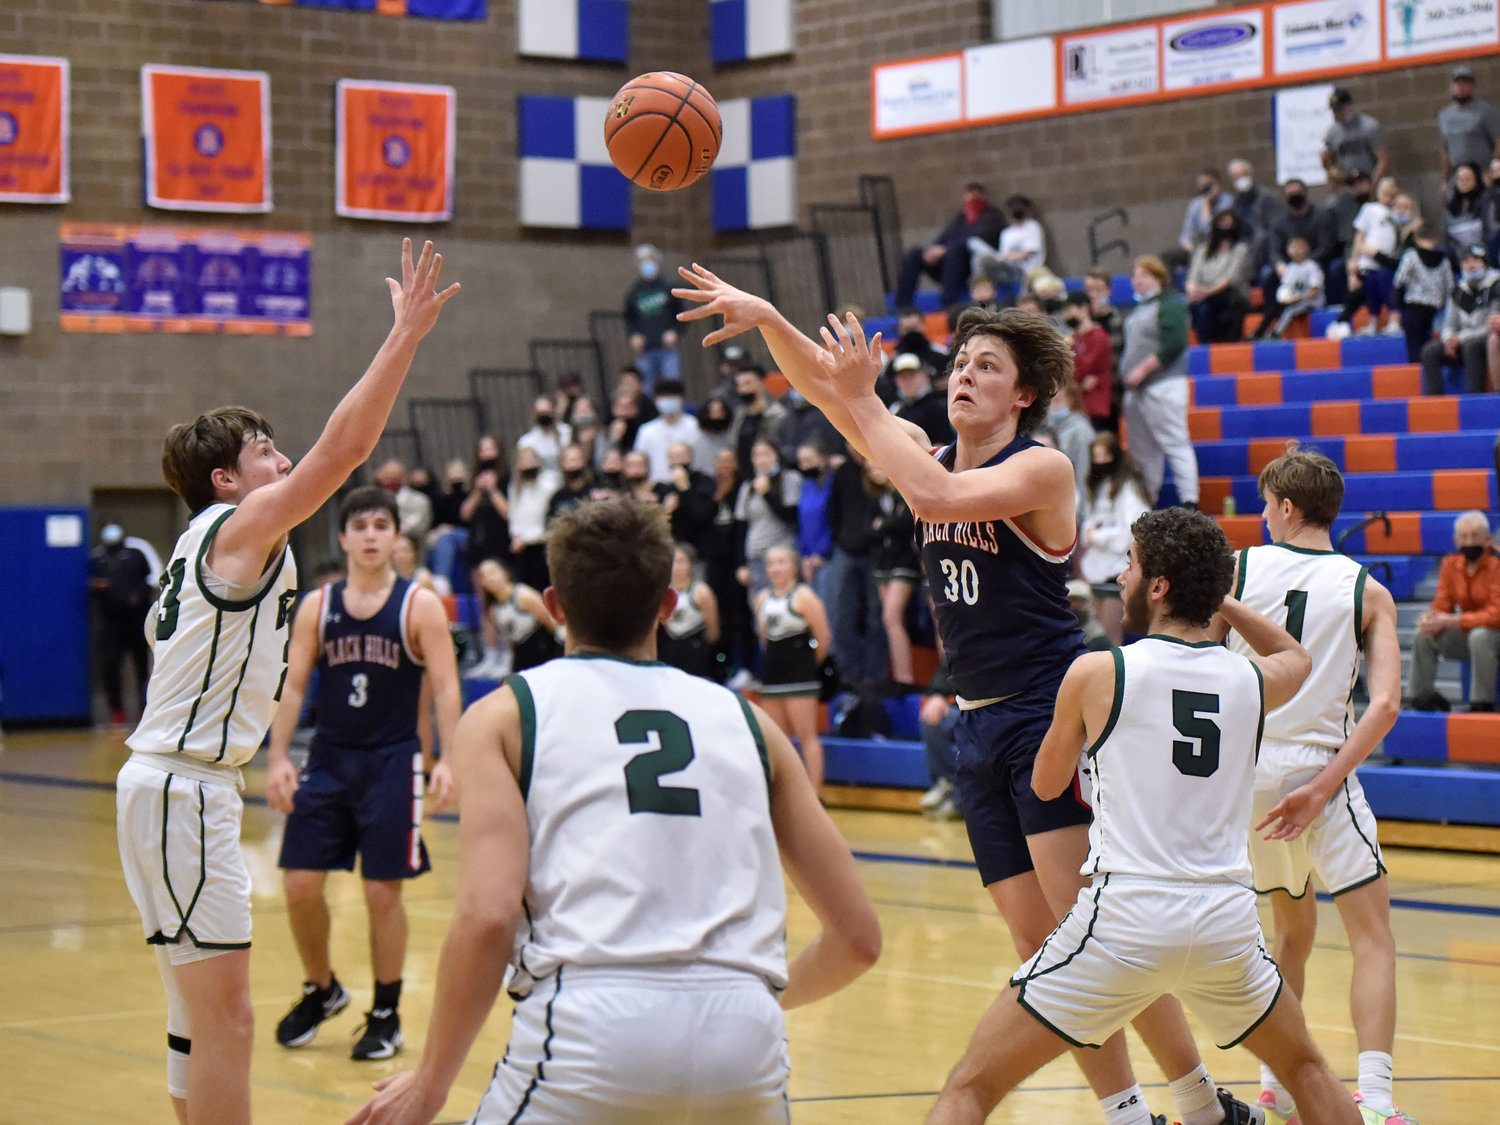 Black Hills junior Keagen Rongen zips a pass from the key to the corner against Woodland on Tuesday, Feb. 15, at Ridgefield High School.